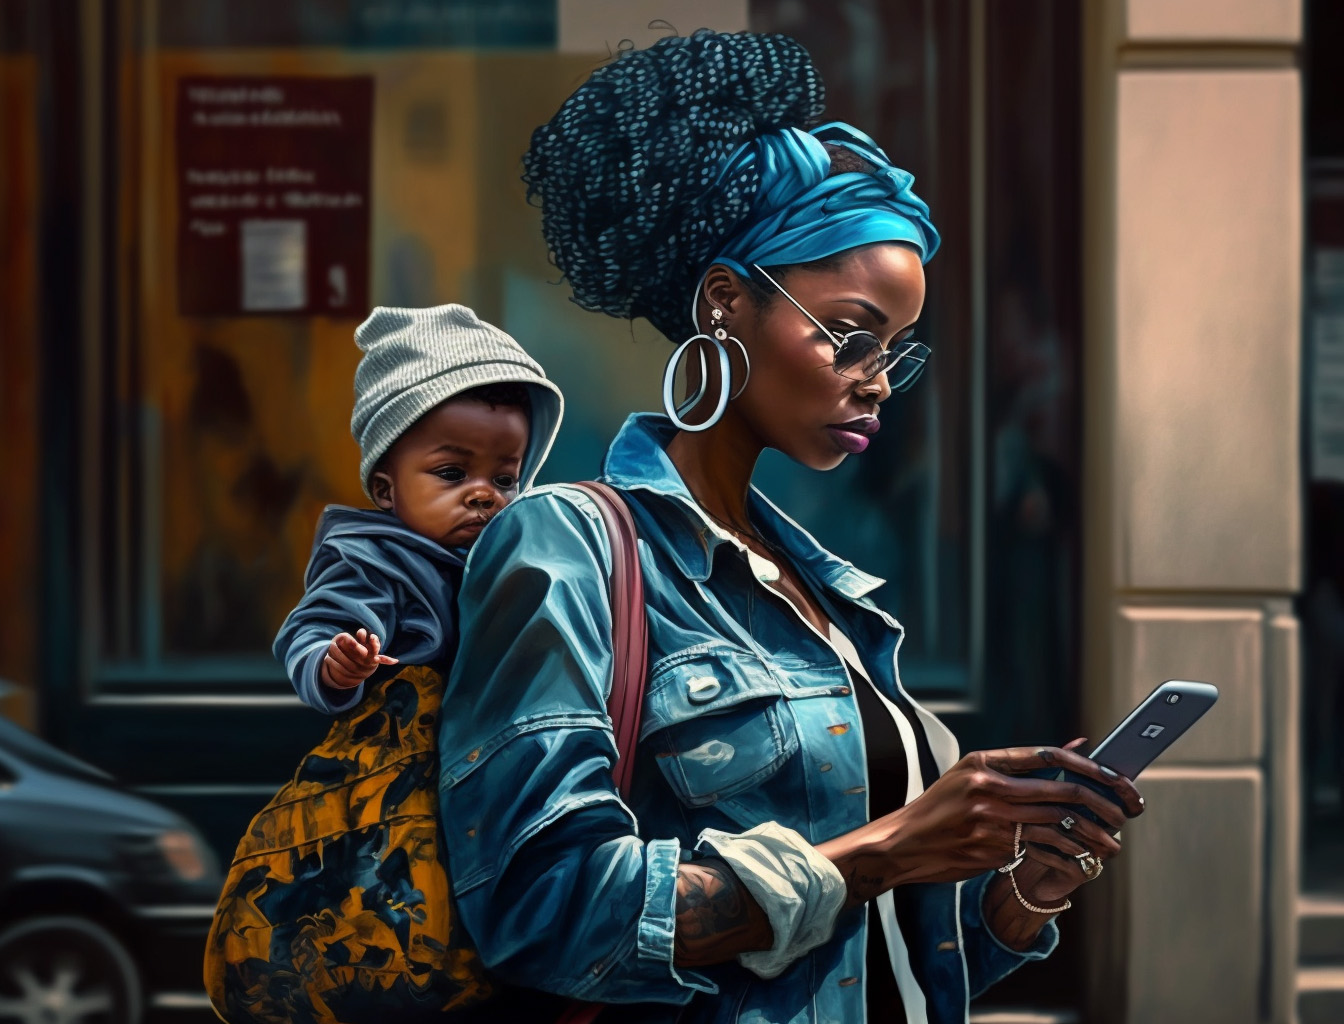 a woman walking on the sidewalk with a phone in her hand, hip-hop style, lifelike figures, she carries a baby with her, shot on 70mm, the blue rider, multilayered, street style --ar 4:3